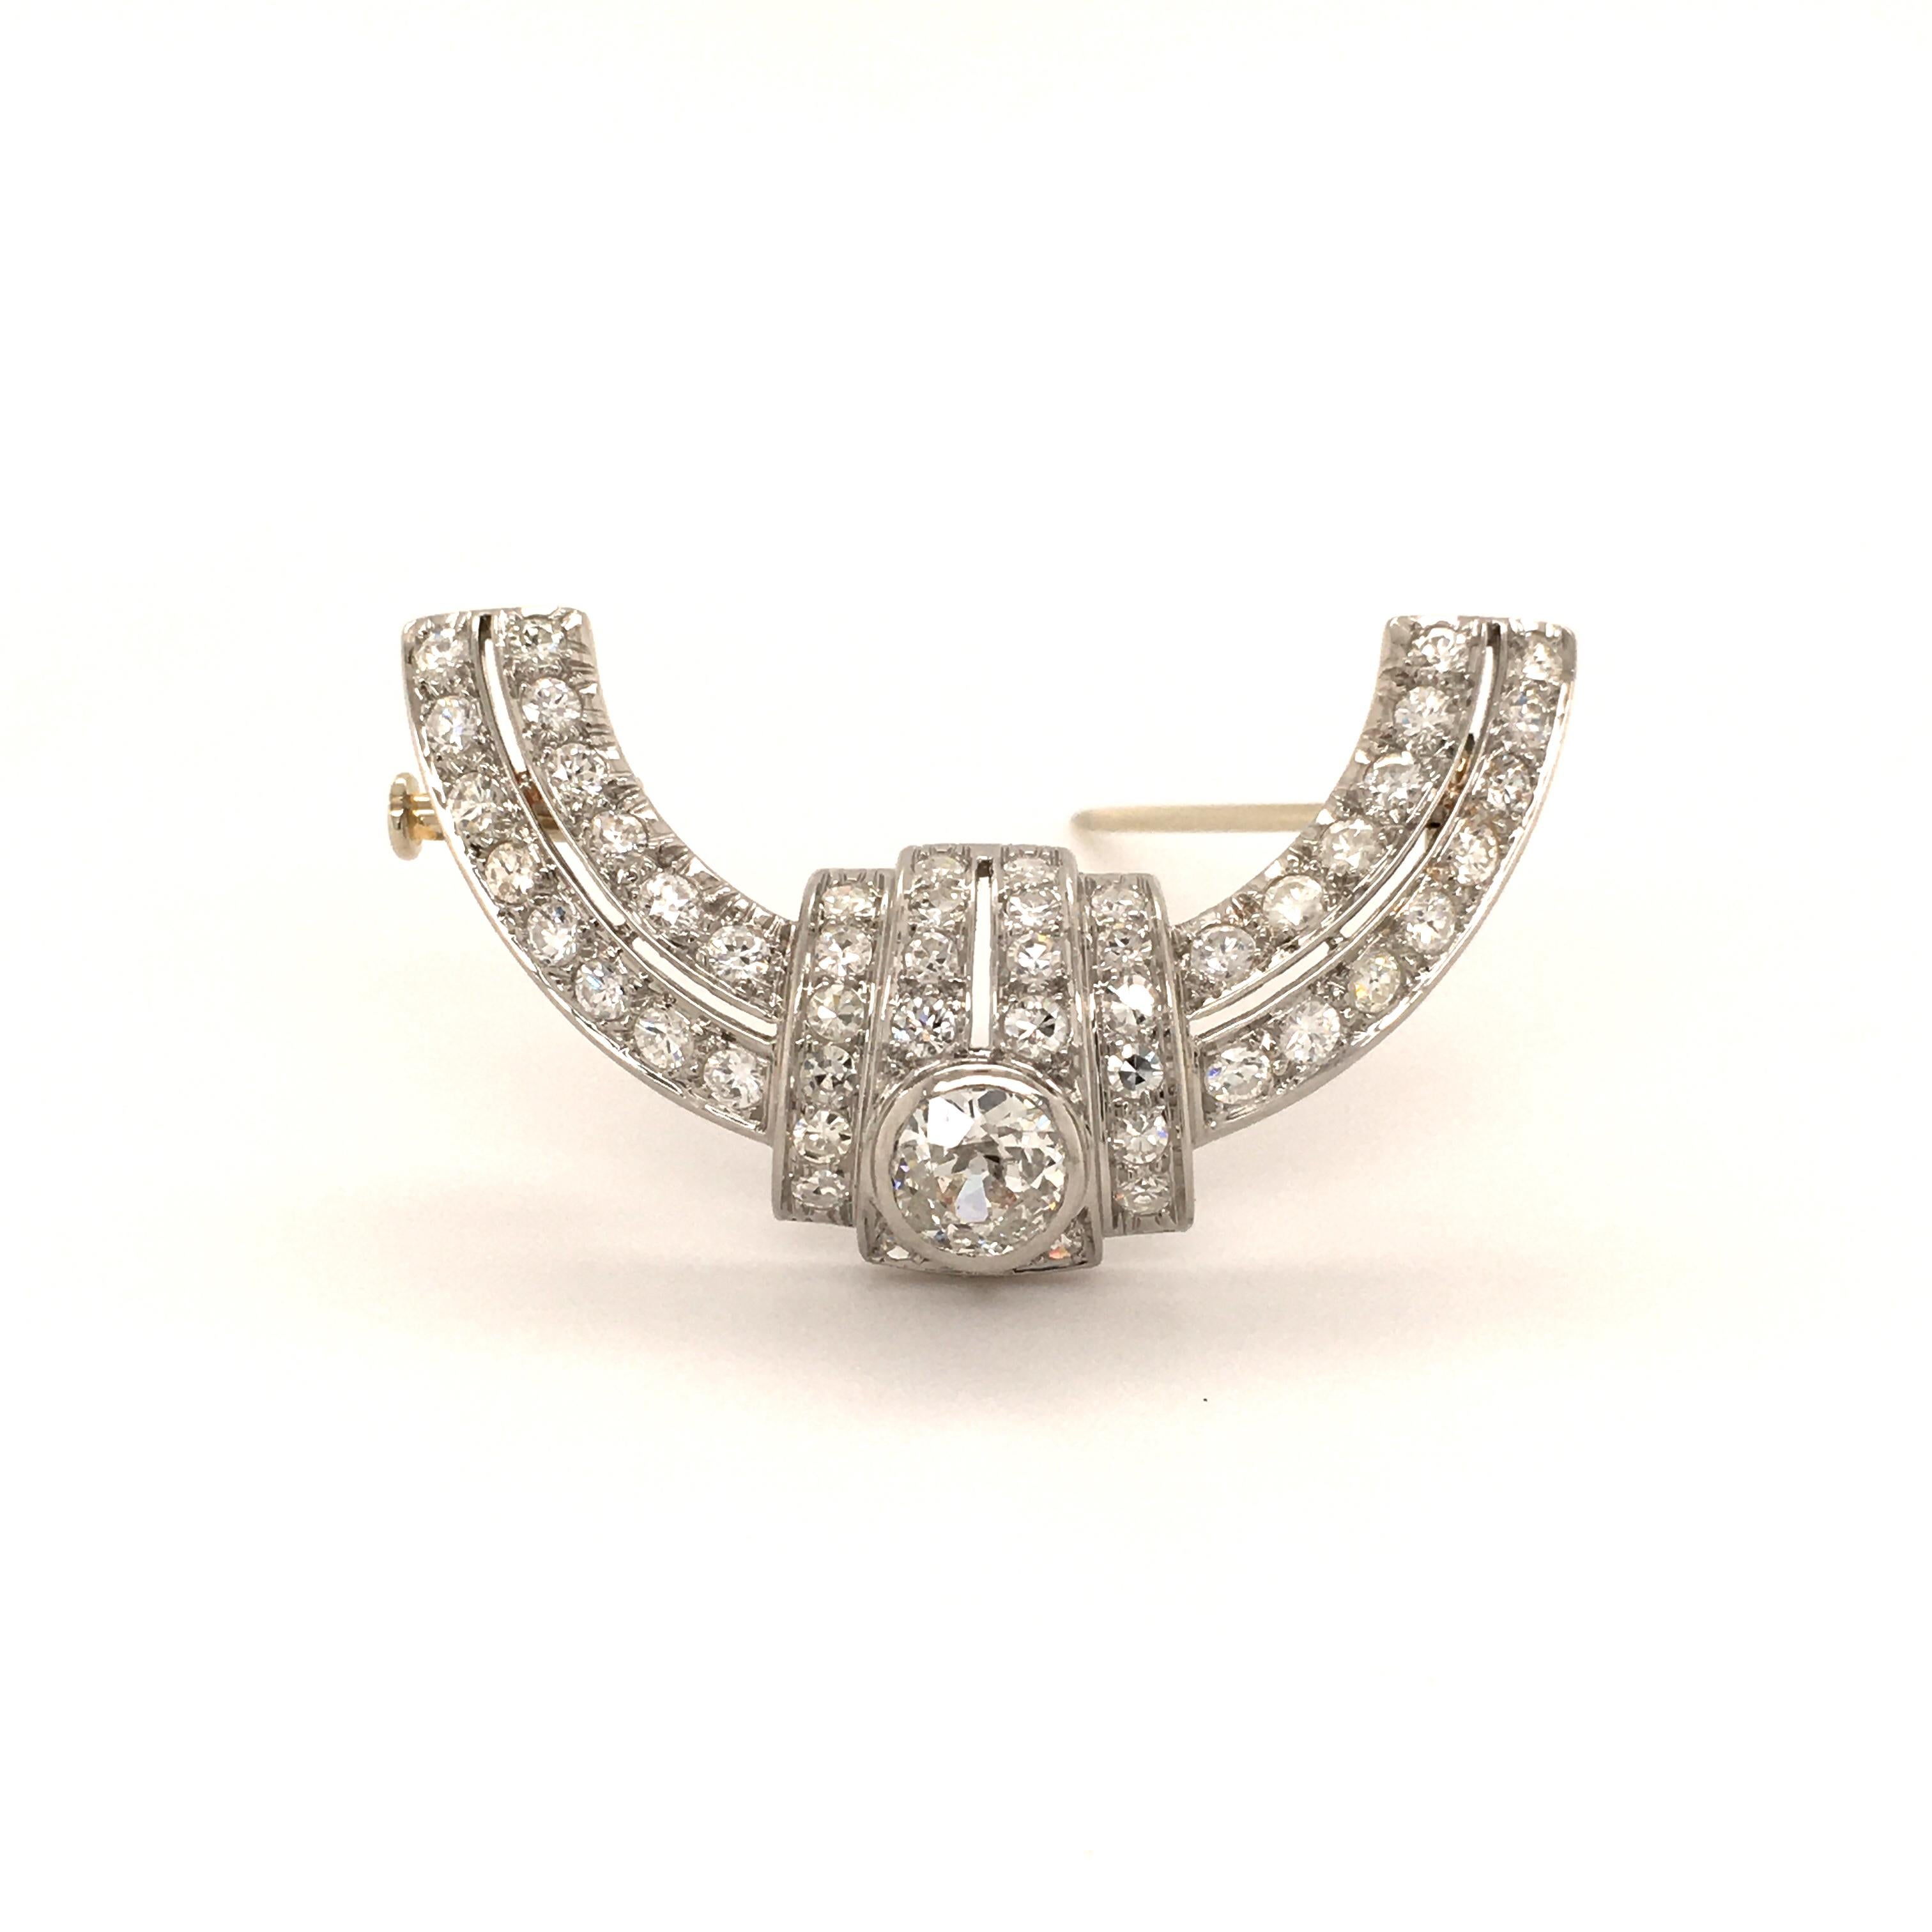 This platinum and diamond Art Deco brooch is set with one old cut diamond of 0.74 carats, F/G color and i1 clarity. Fine openwork setting in platinum 950 with 50 single cut diamonds of G/H color and vs/si clarity, total weight approximately 2.00